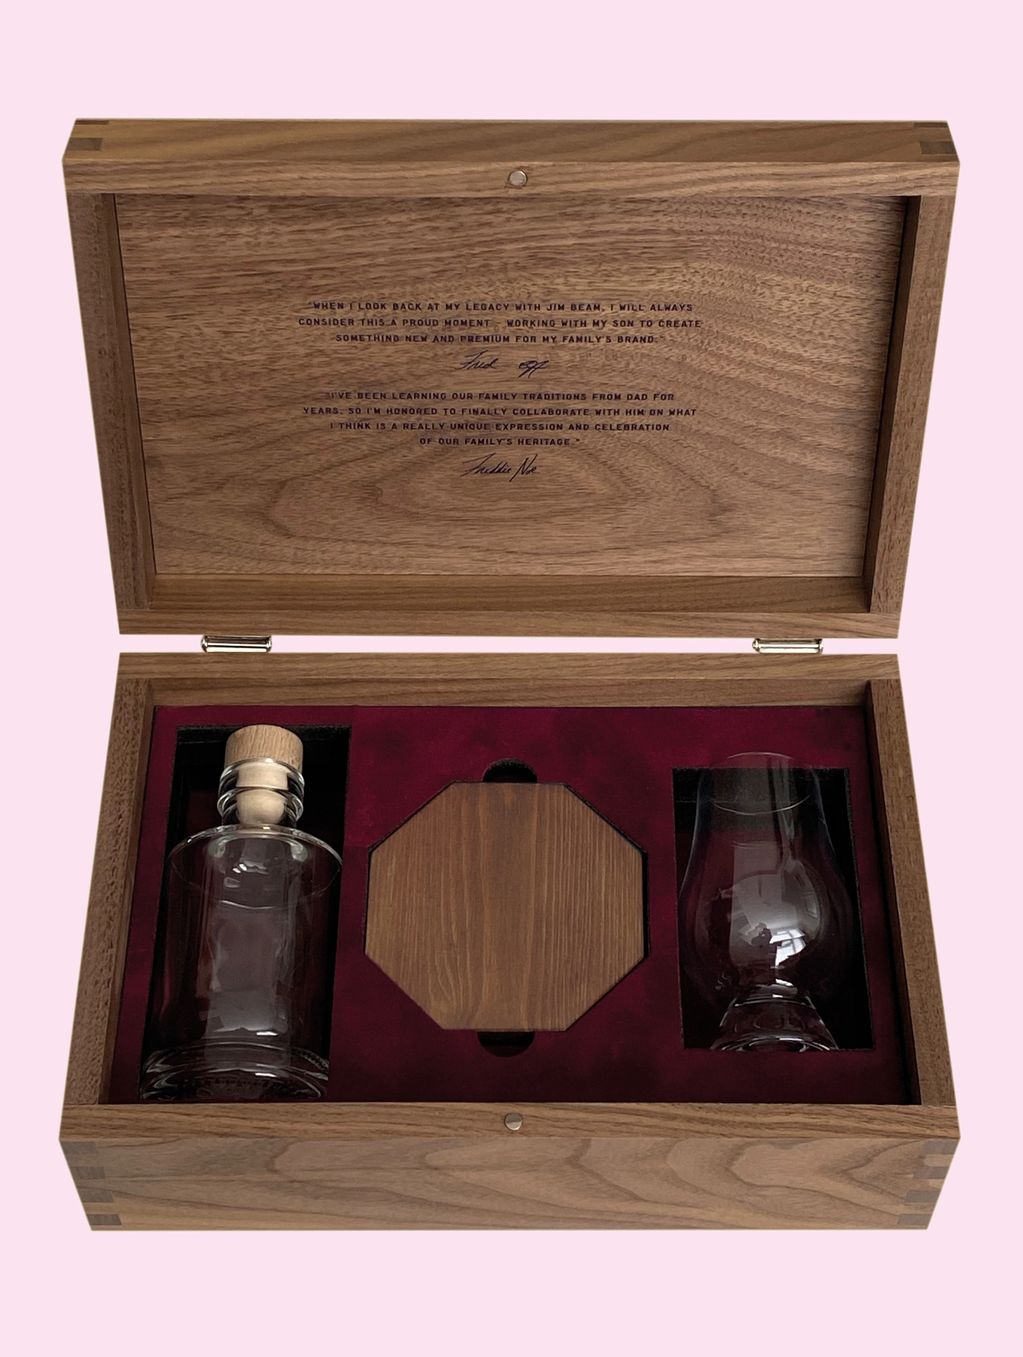 Winter & Company Suedel covered tray, with an inked engraving on the inside lid and a magnetic closu